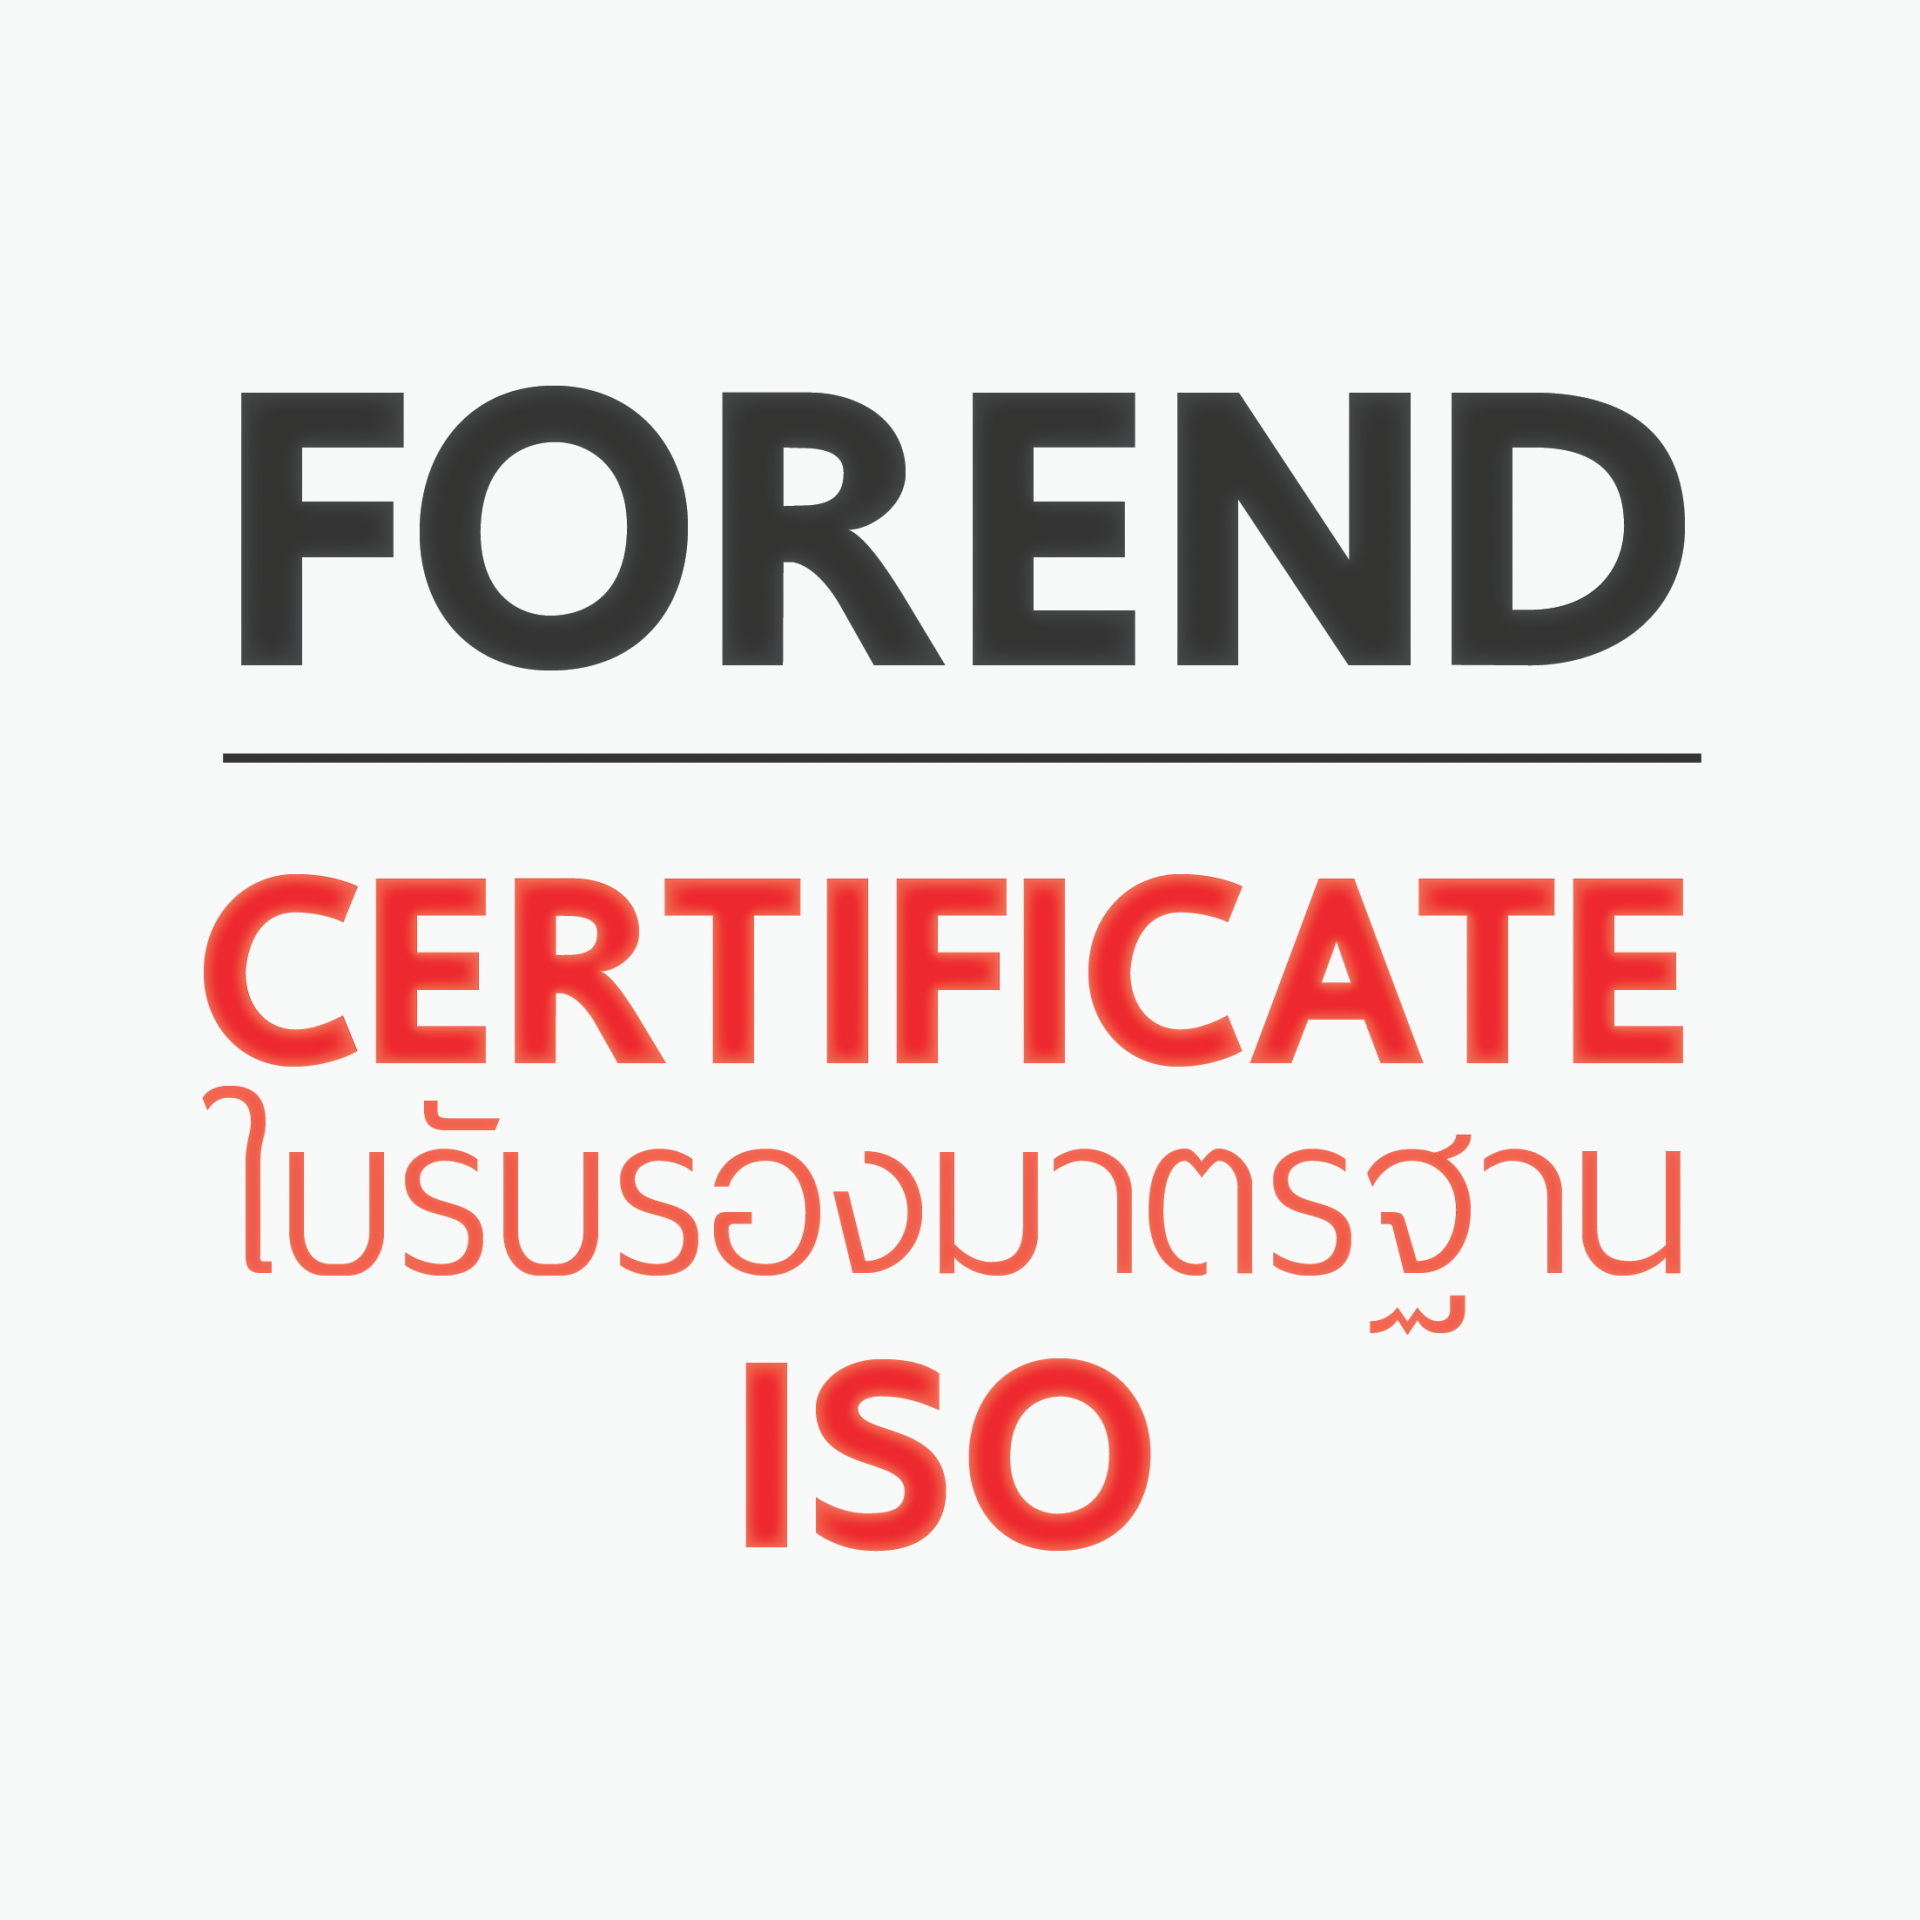 CERTIFICATE FOREND